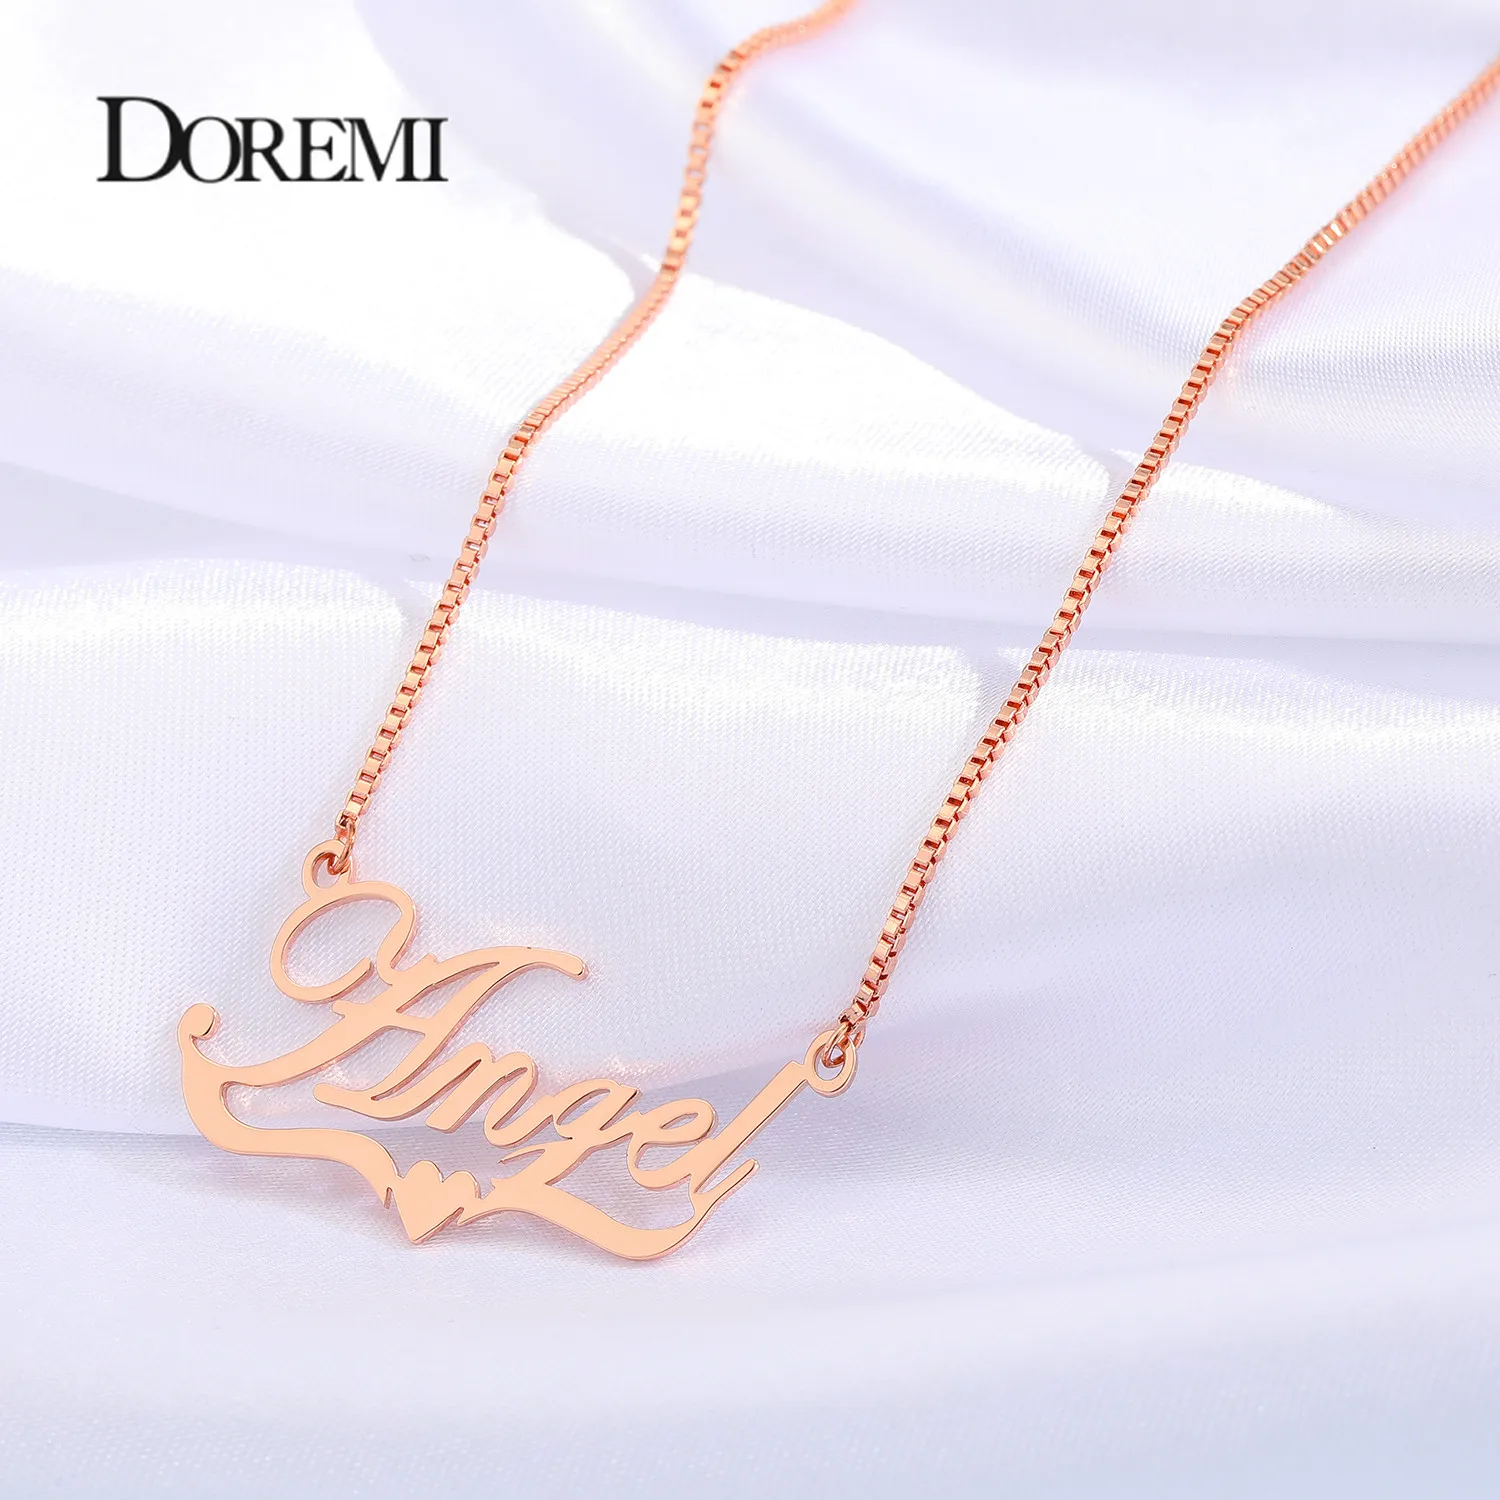 DOREMI Stainless Steel  Custom Name Necklace Personalized Name Pendant Heart Choker for Women Men Jewelry Valentine's Day Gift valentine s day heart shaped earrings epoxy mold diy angel wings love jewelry necklace pendant resin silicone mold